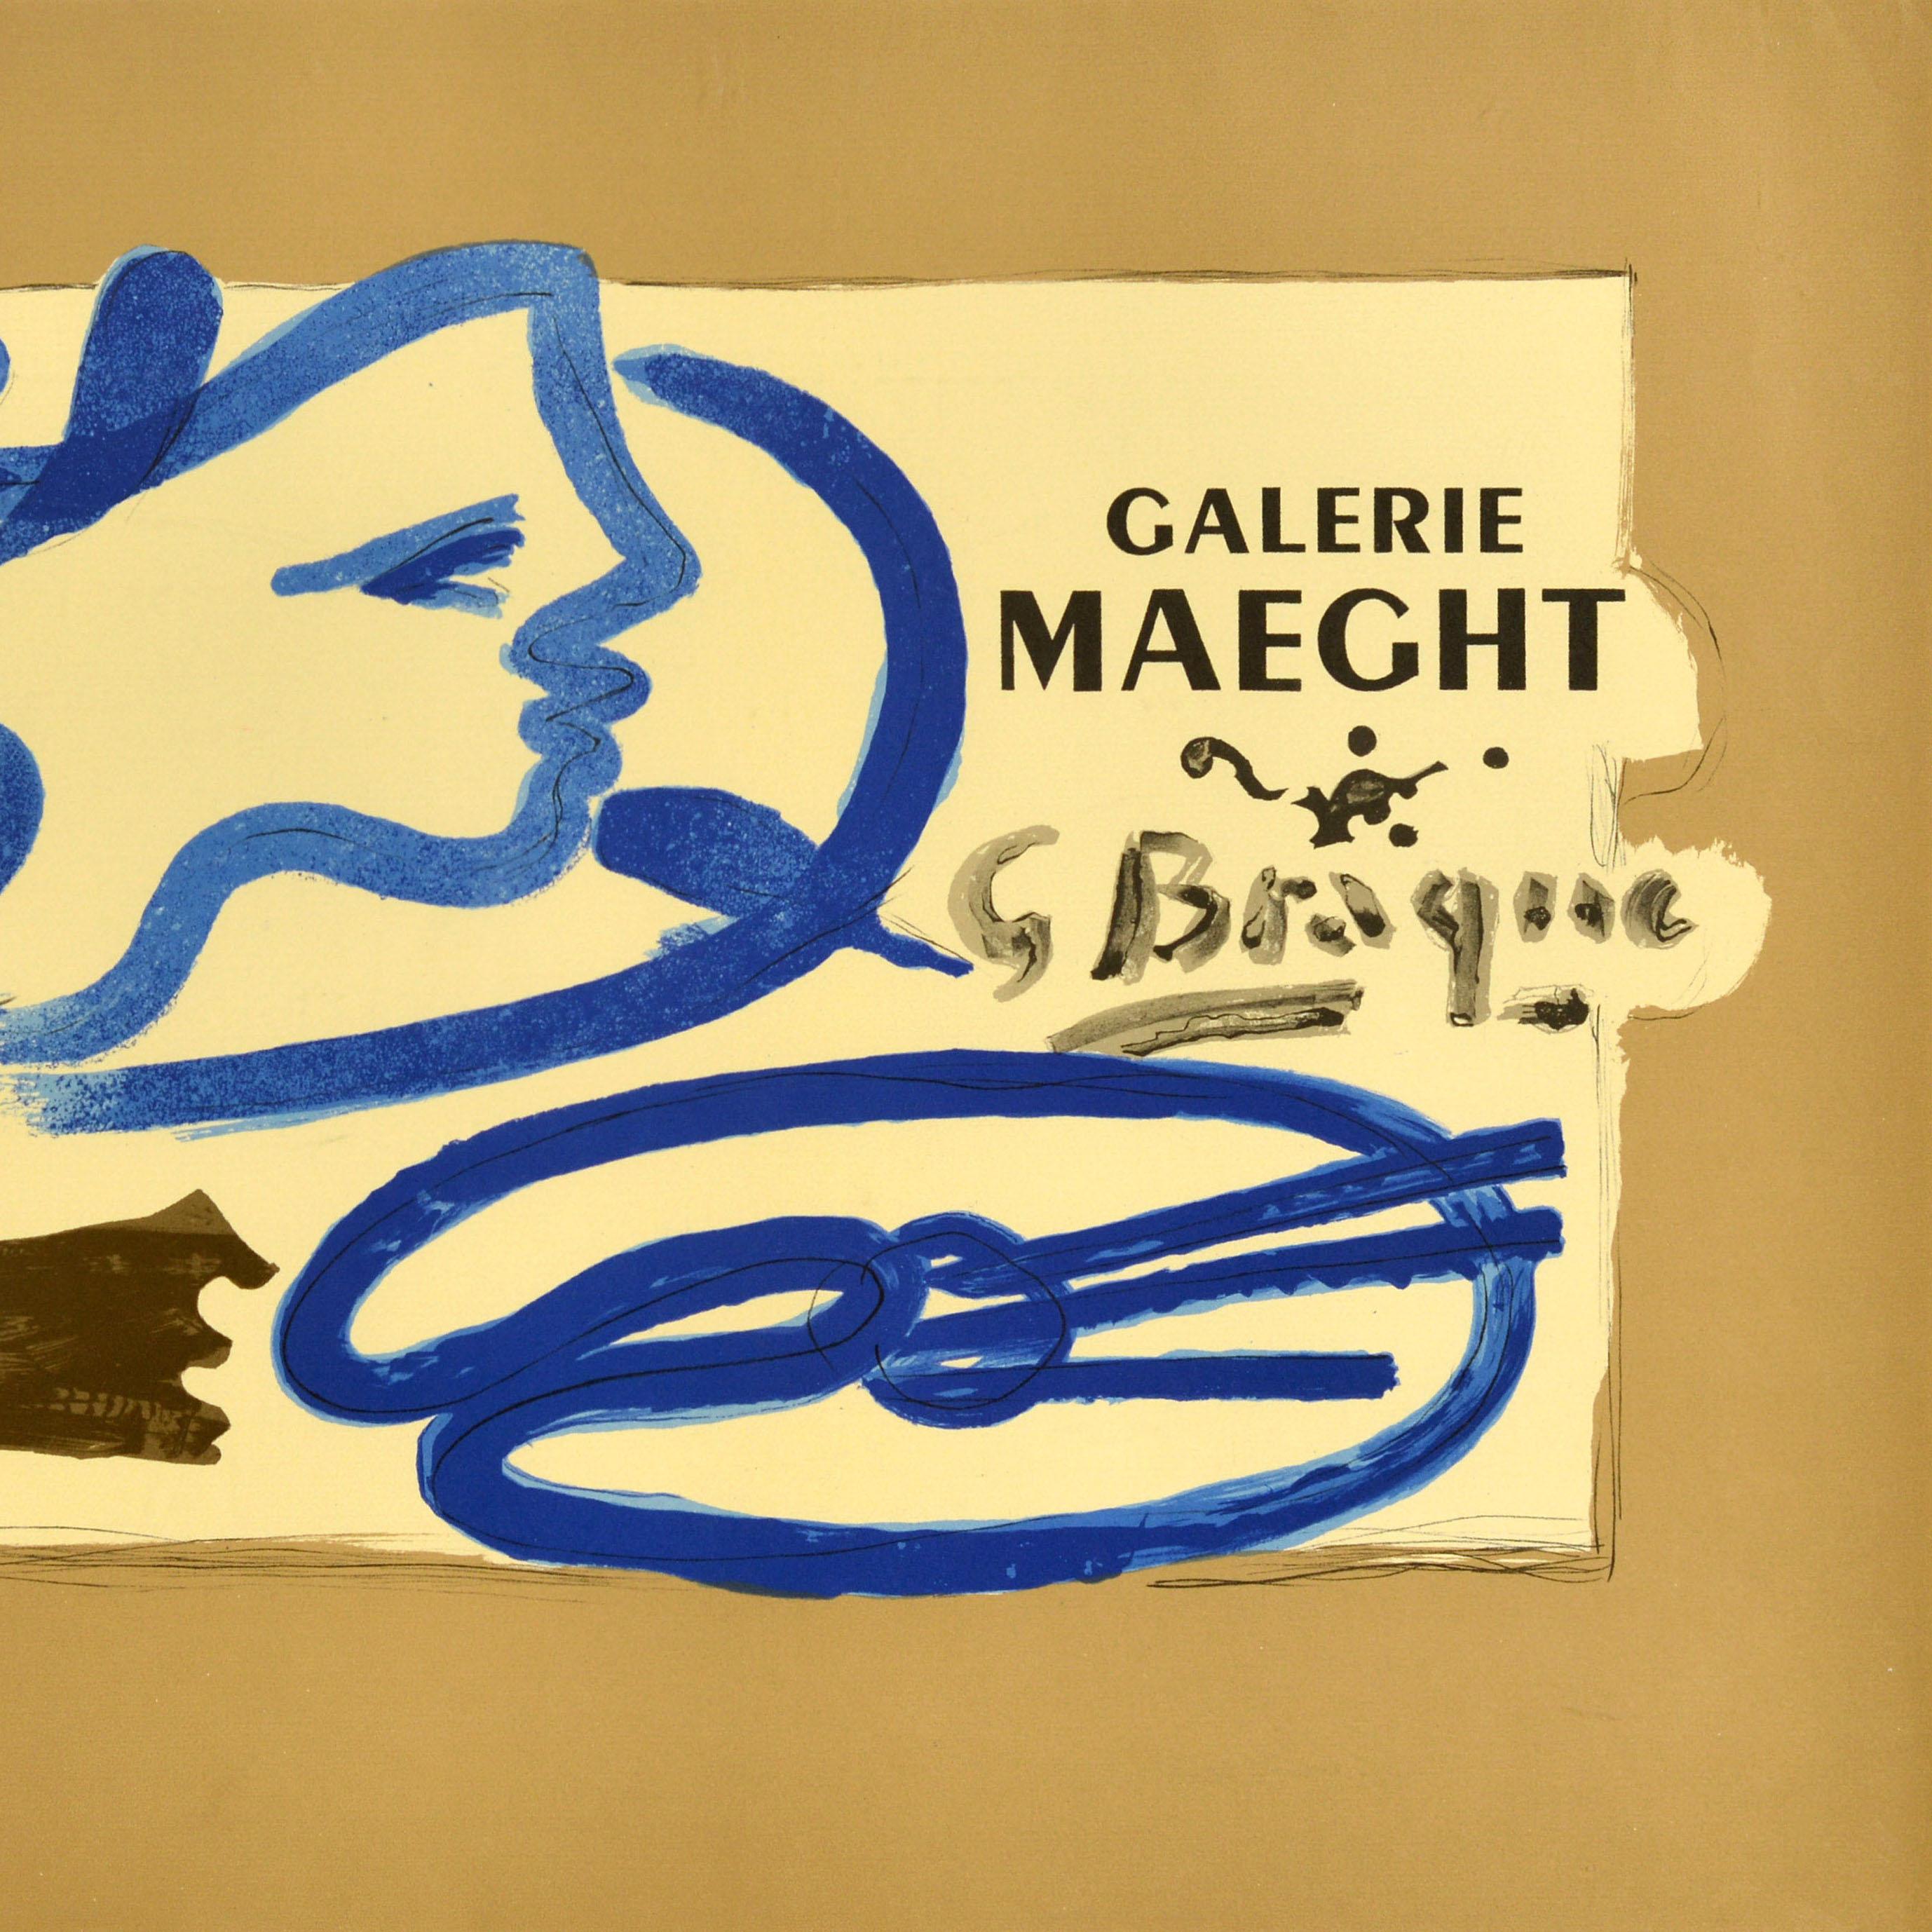 Original Vintage Art Exhibition Advertising Poster Georges Braque Galerie Maeght For Sale 1